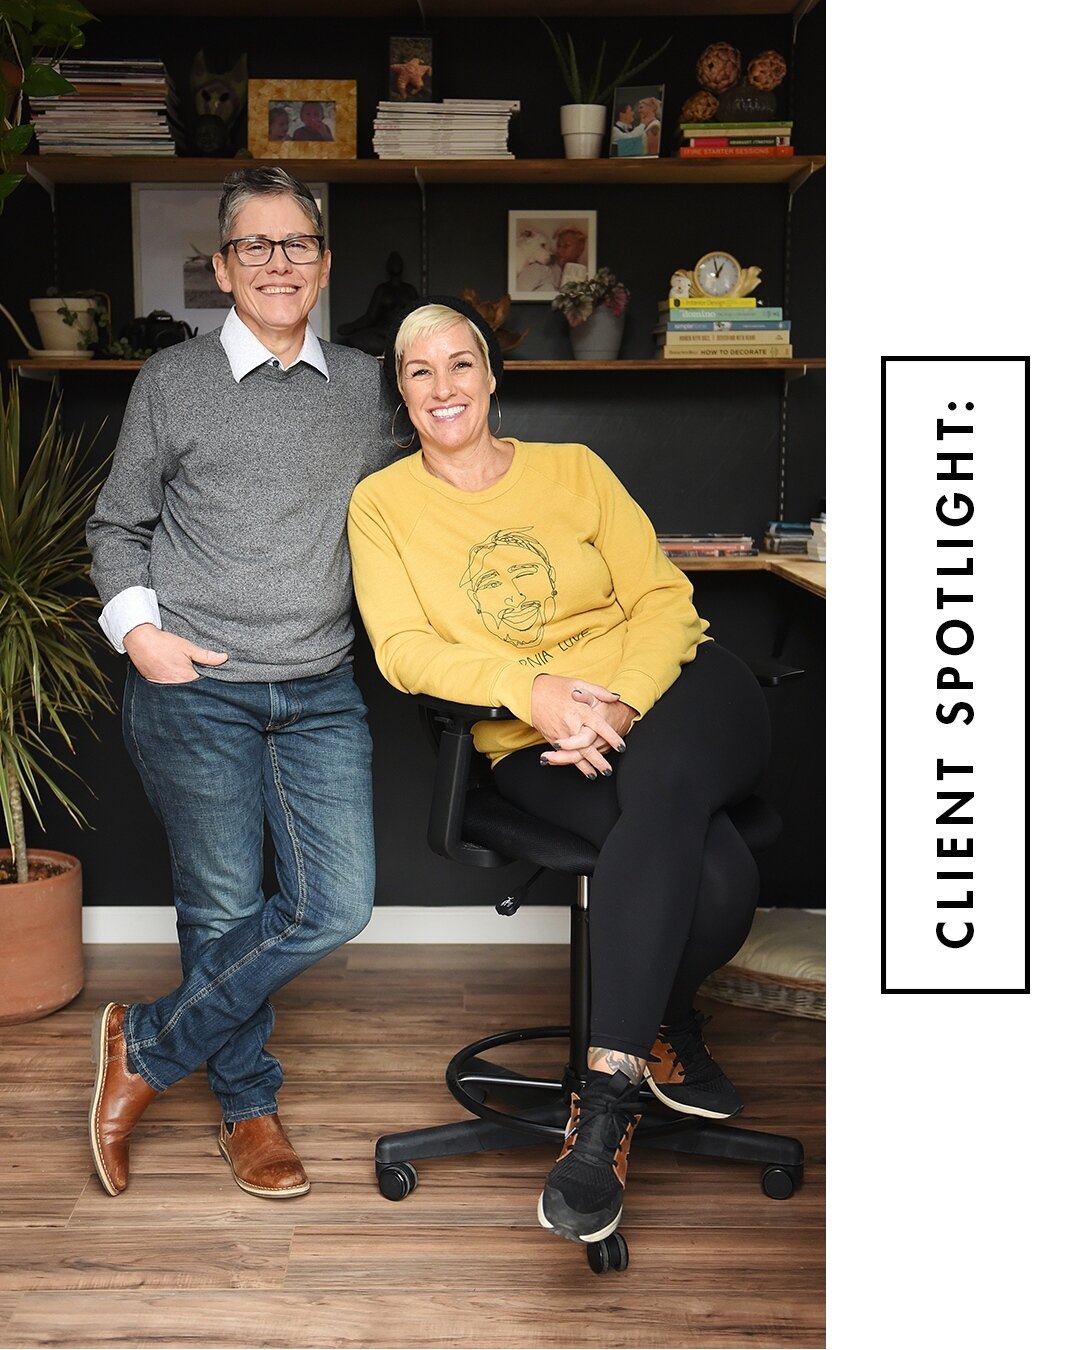 I thought it would be fun on this #TBT to highlight one of my previous branding clients! This is Cris and Mollie of @flaxandstonedesign, a Sacramento-based full service interior design and home remodel business. They ⁠do really beautiful work - check